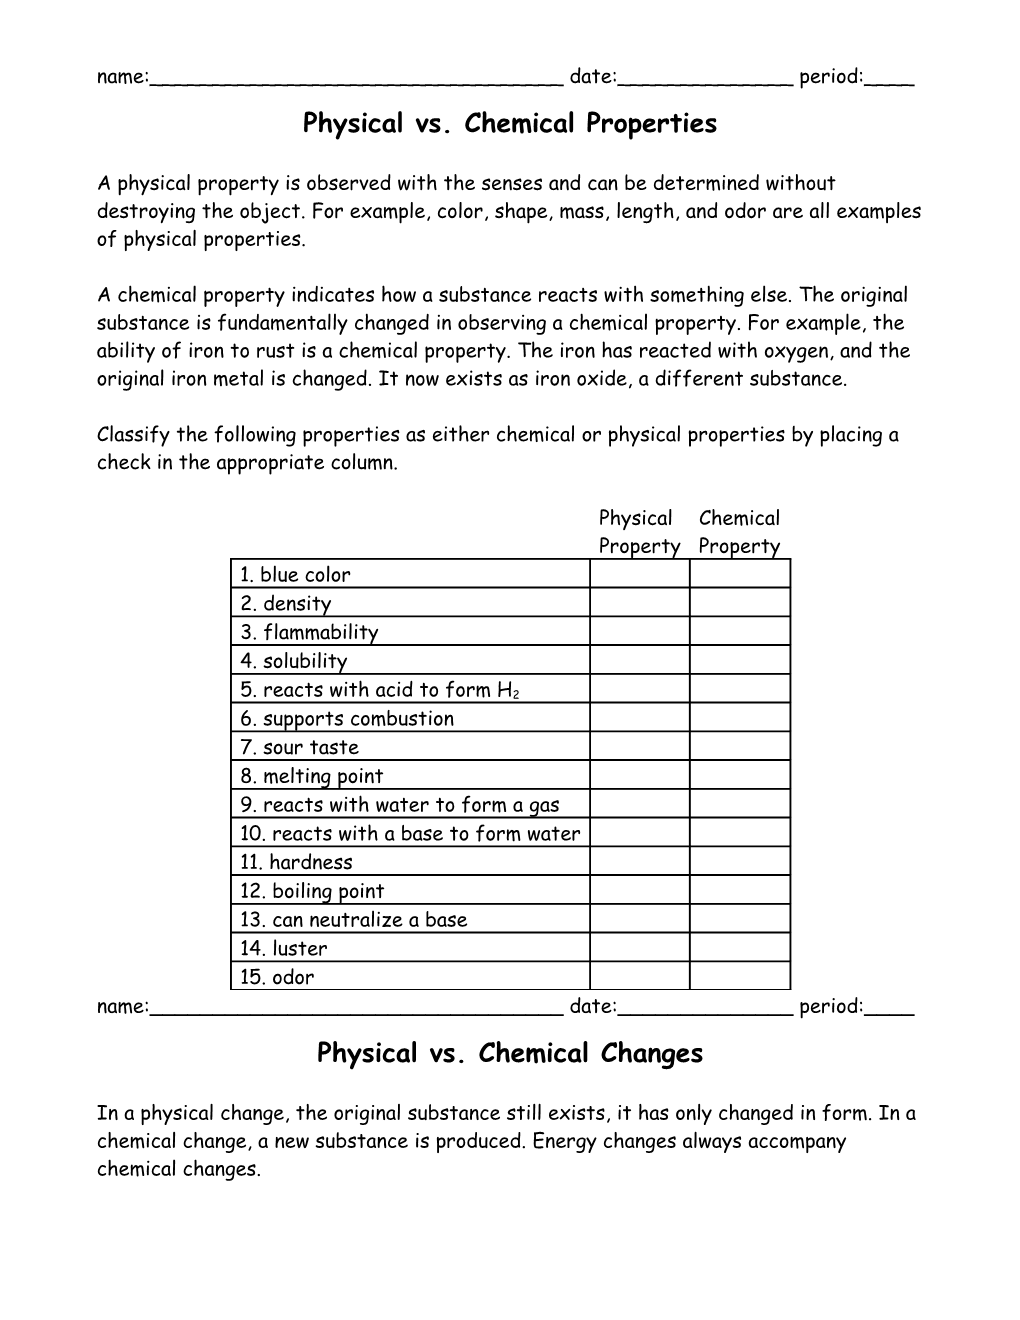 Physical Vs. Chemical Properties